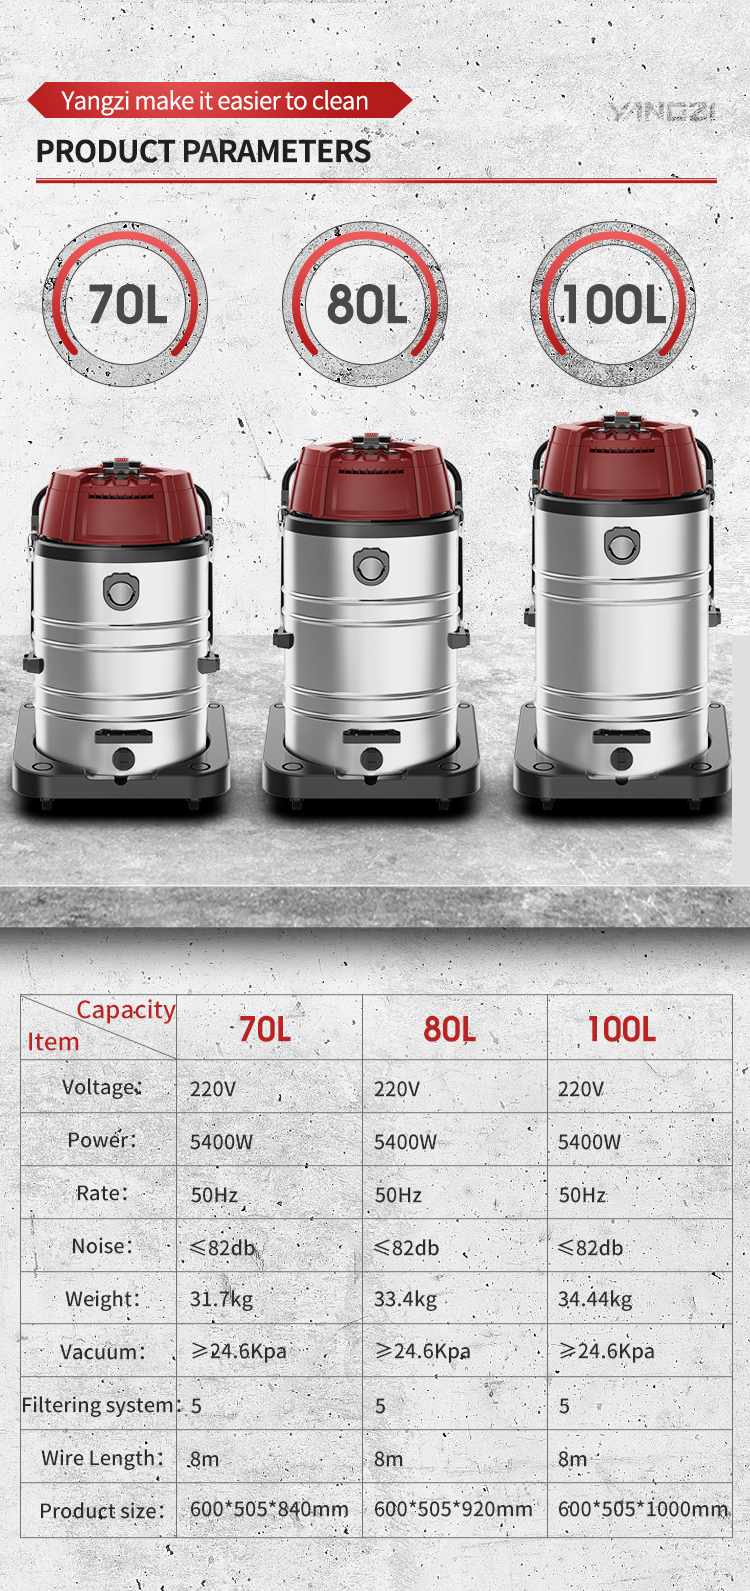 Yangzi 504 Strong Suction Commercial Vacuum Cleaner(20)